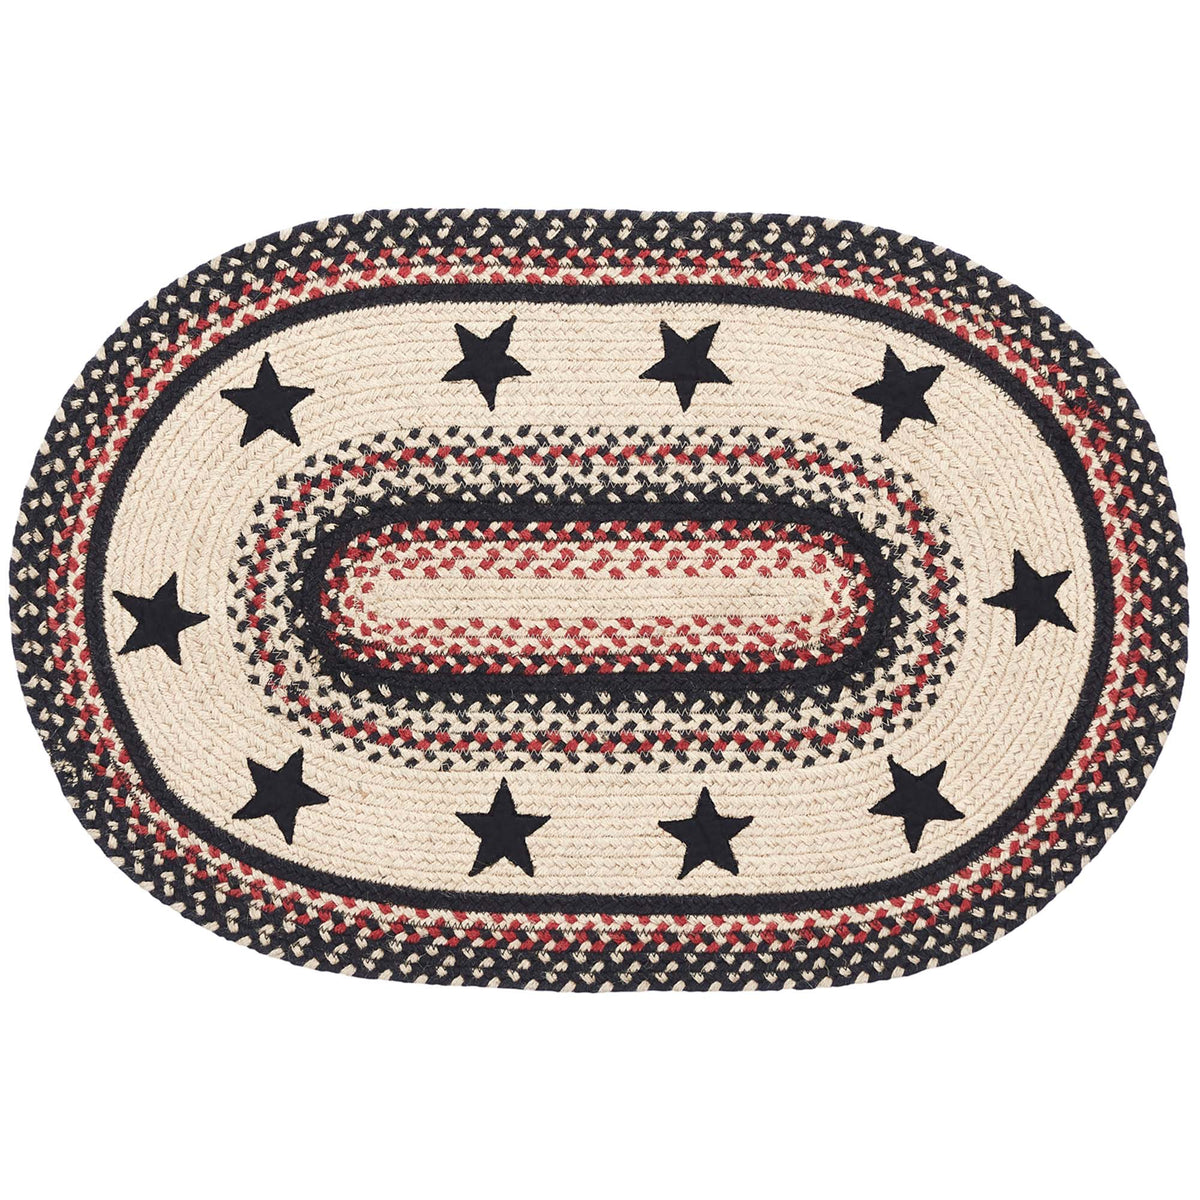 Colonial Star Jute Rug Oval 20x30